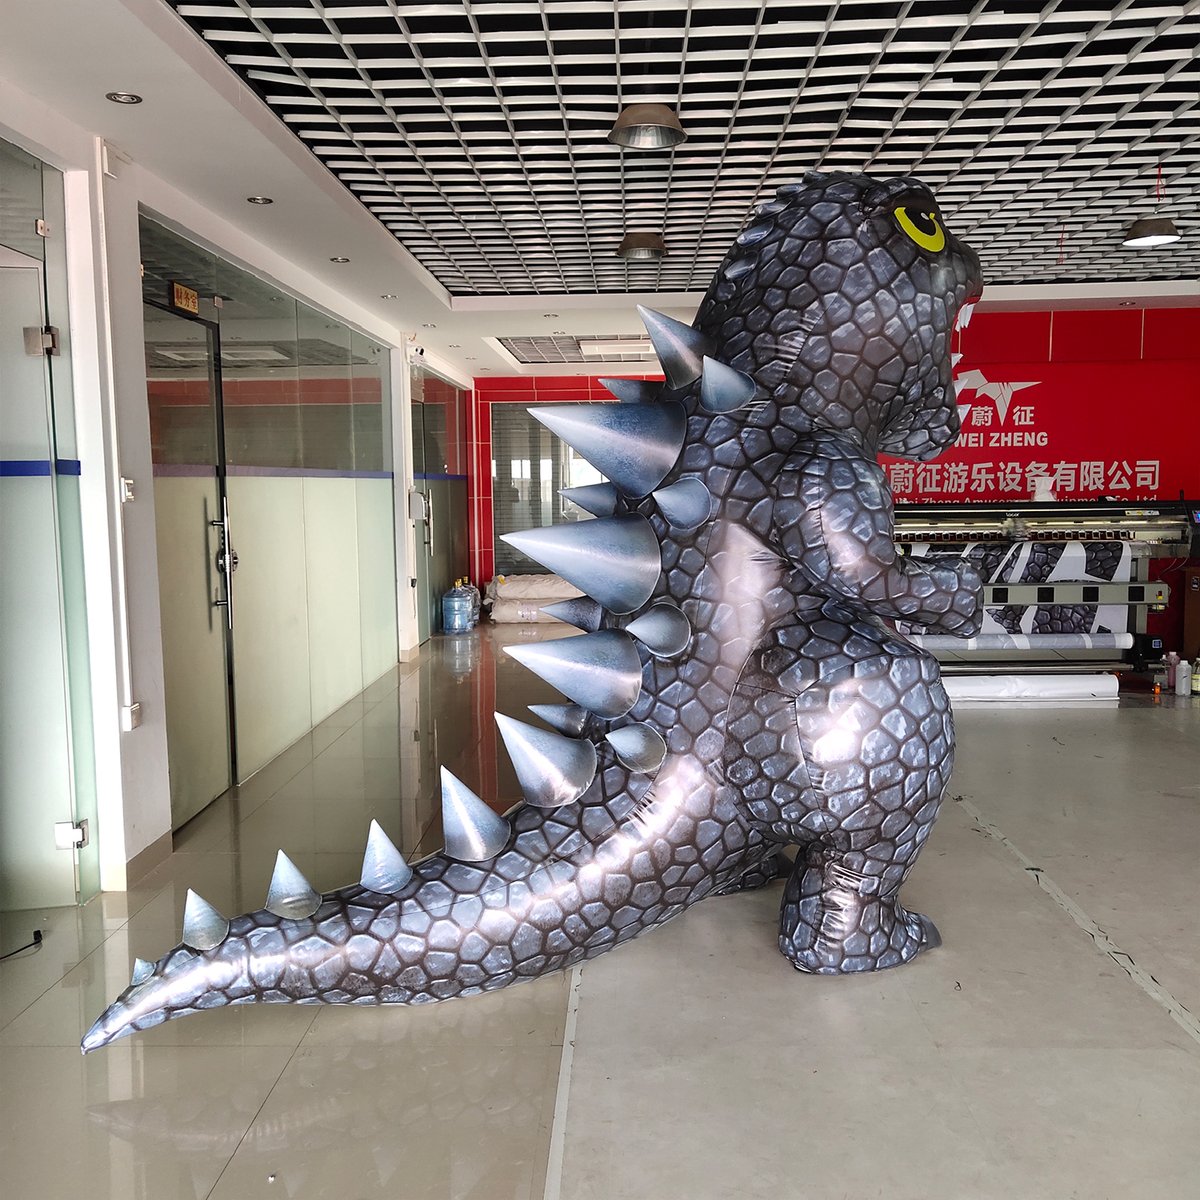 Love the Wei Zheng Godzilla inflatable suit, towering, massive, and LOADS o...